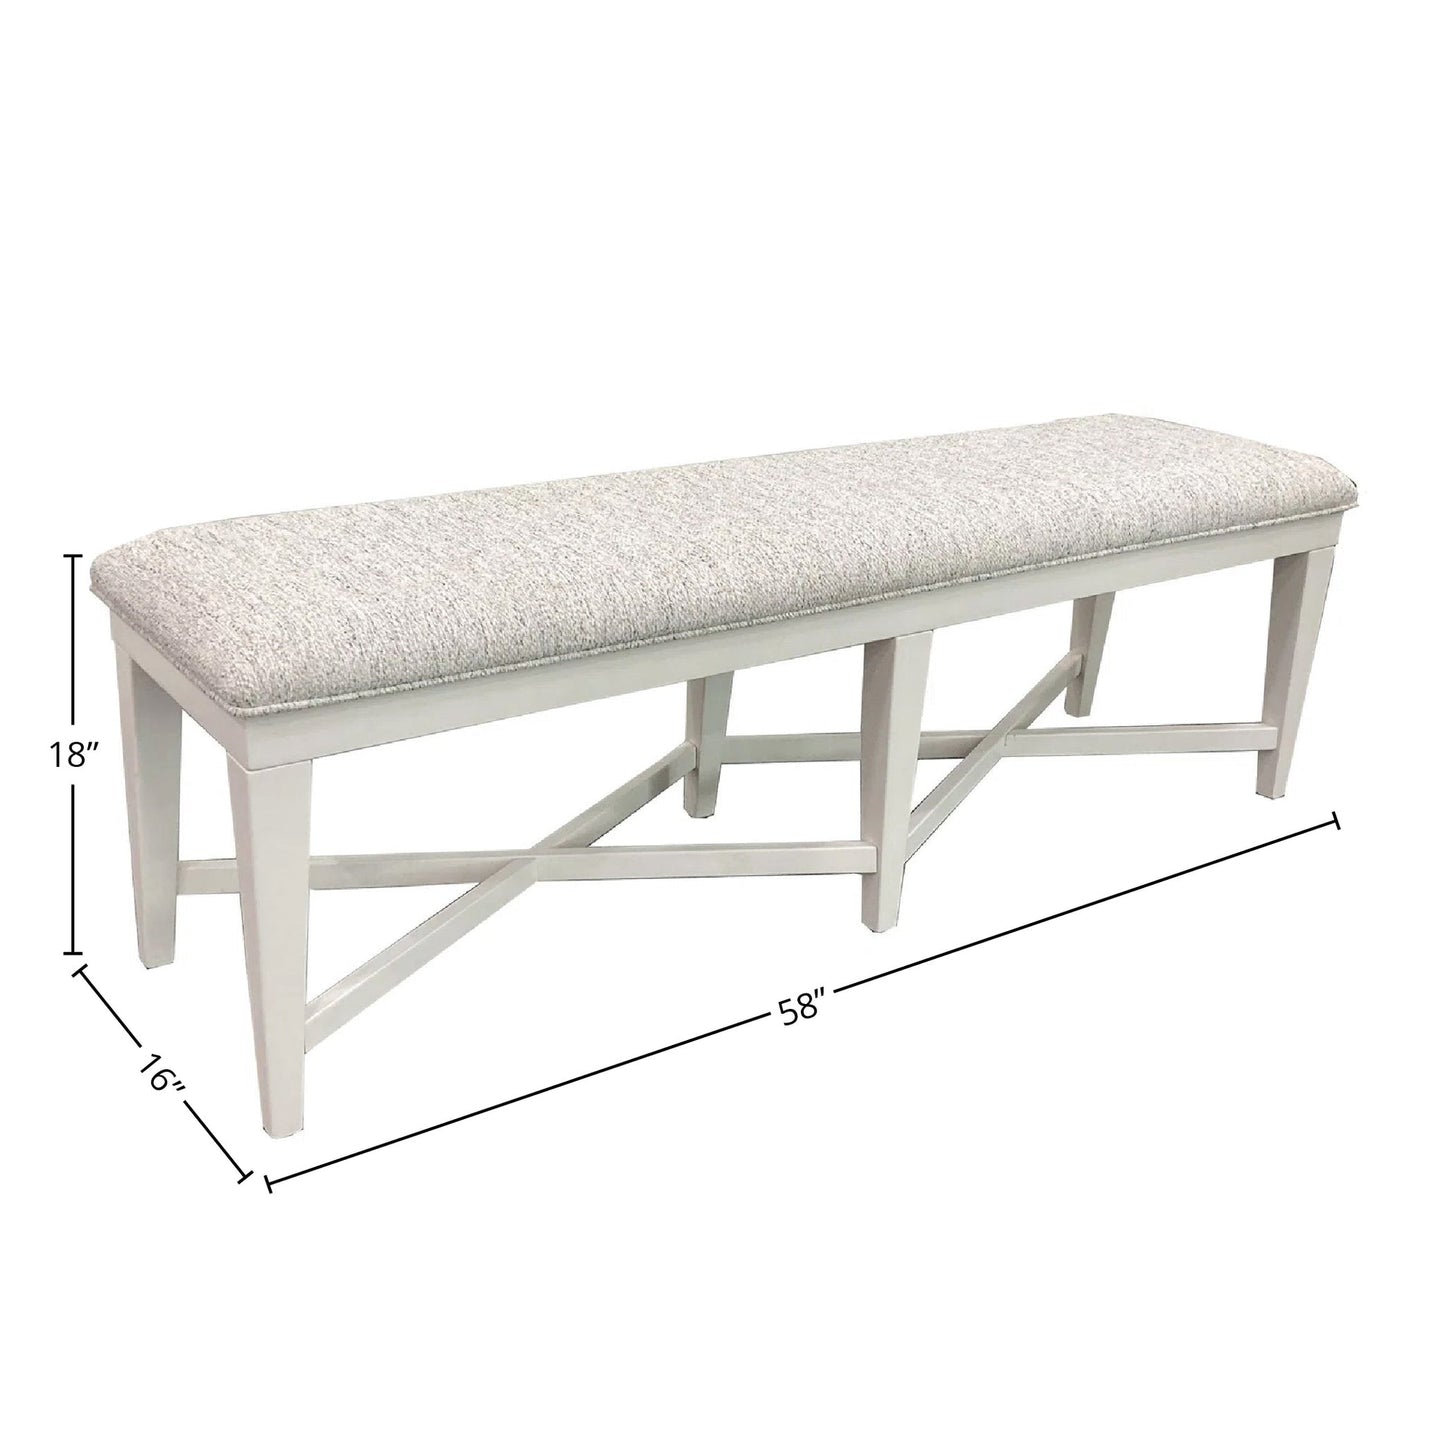 AMERICANA MODERN DINING BENCH UPHOLSTERED 58 IN.